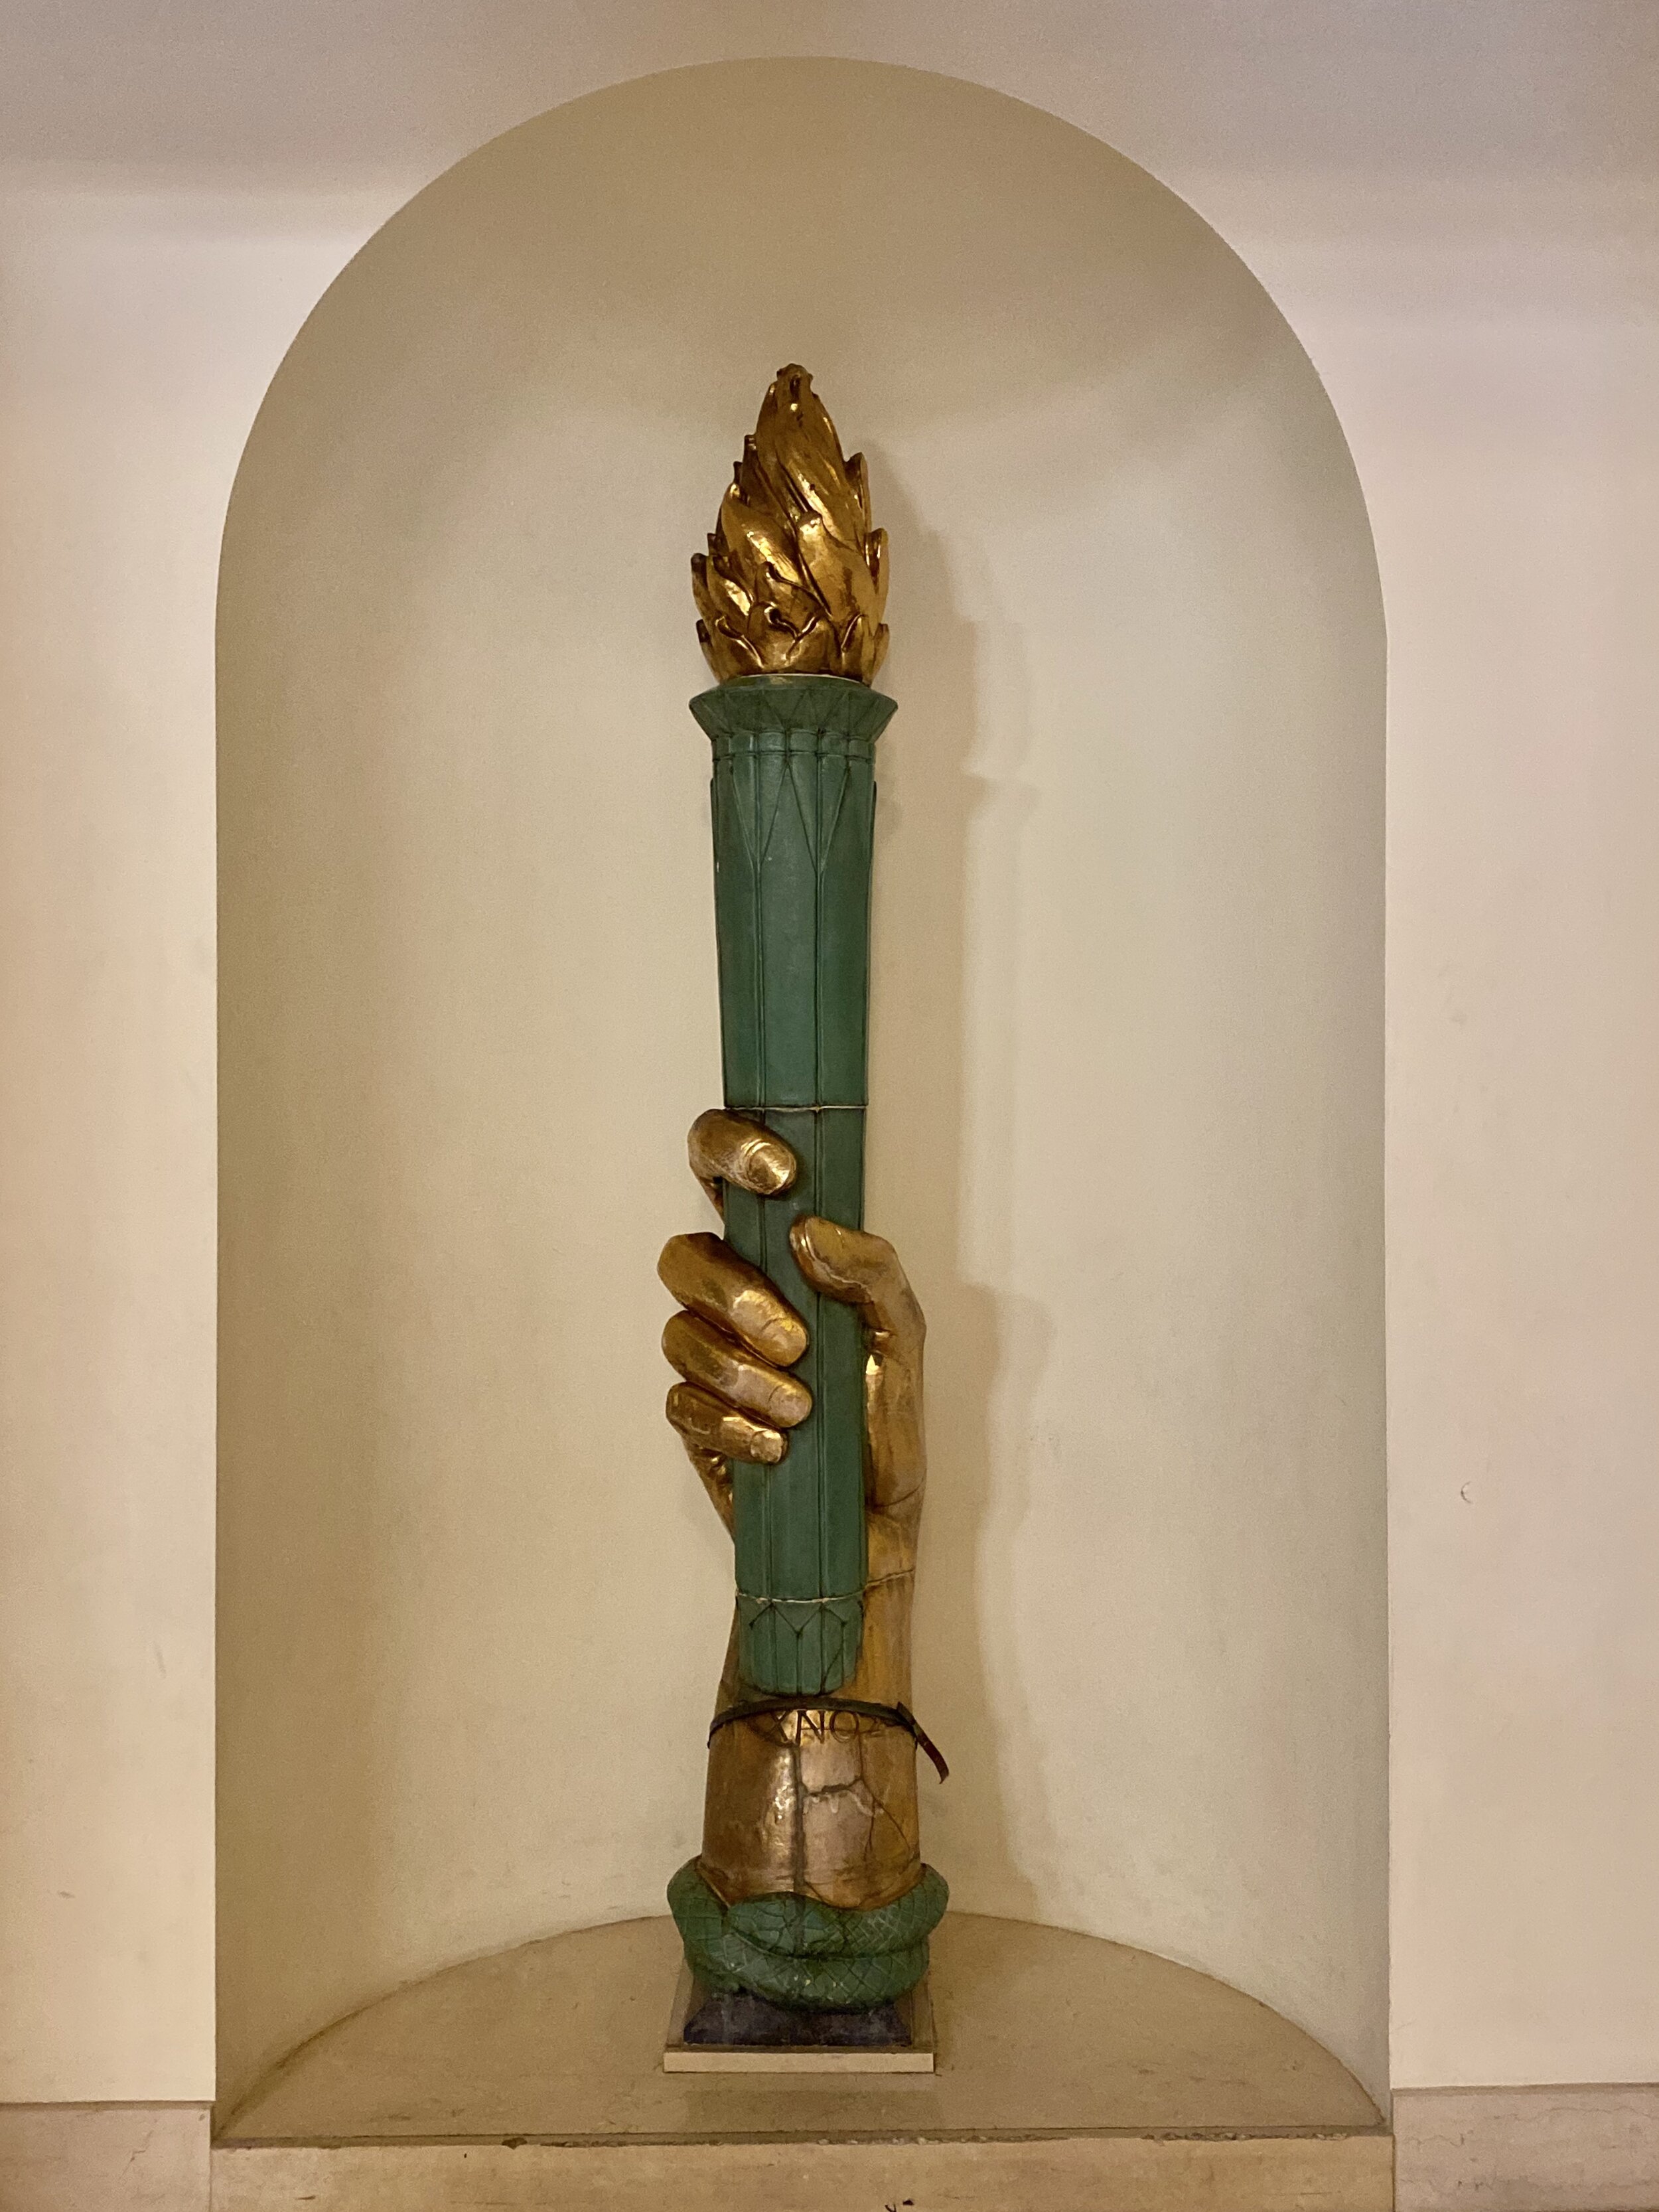 Original "Torch of Knowledge" that used to be on top of the roof.